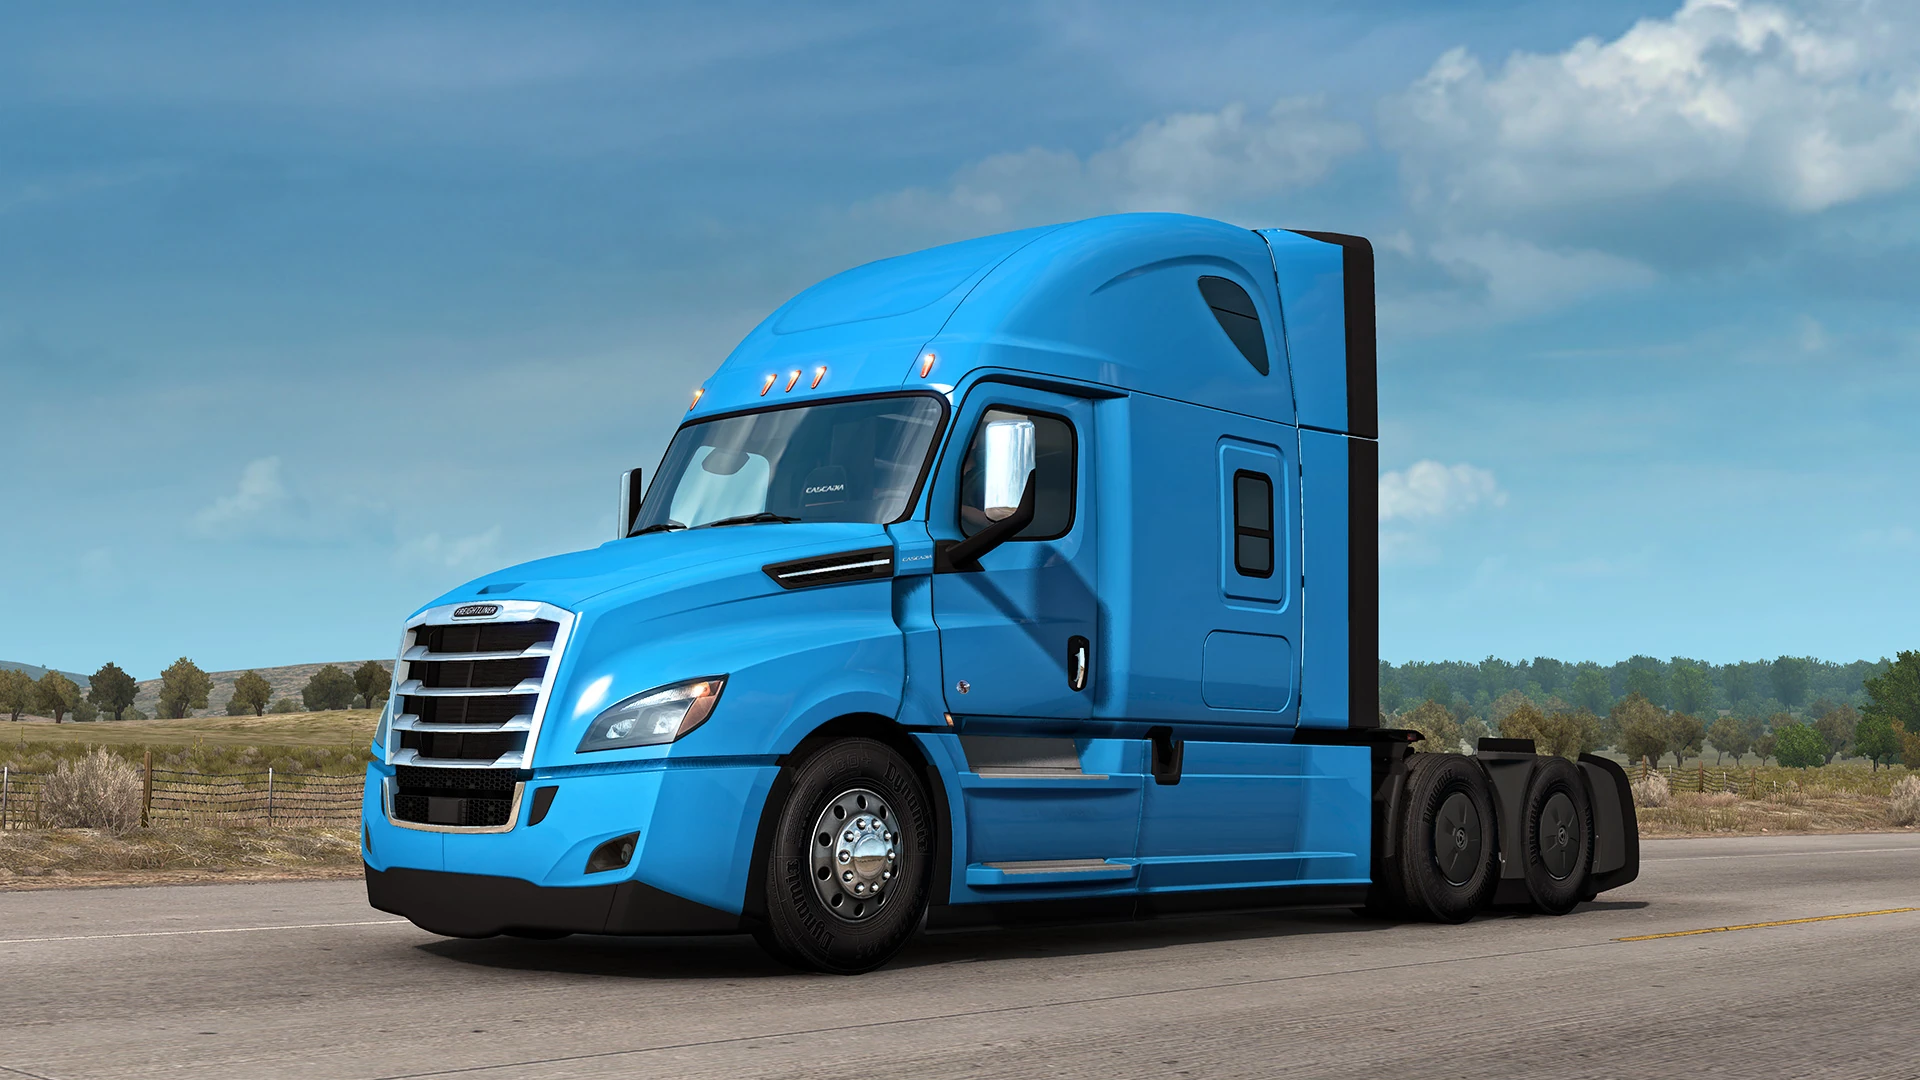 The Importance of Choosing a Reputable Freightliner Dealership